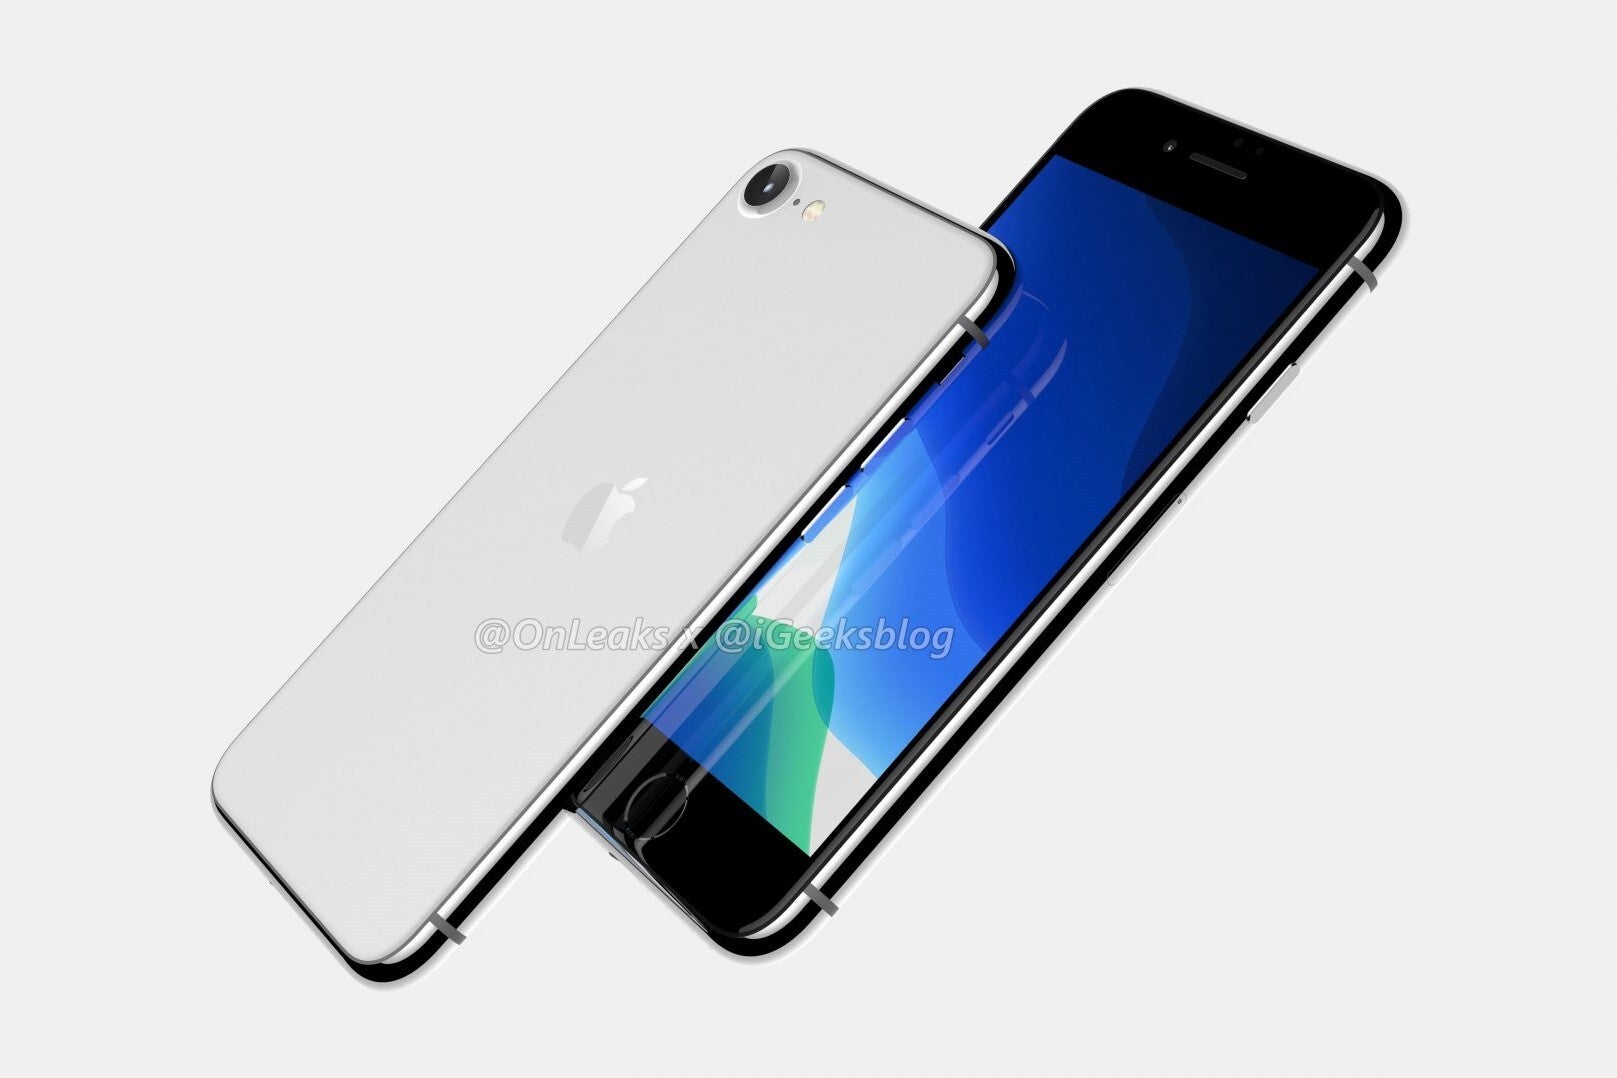 Apple iPhone 9 CAD-based render - Apple's 5G iPhone 12 won't be pushed back to 2021, but future products could be delayed